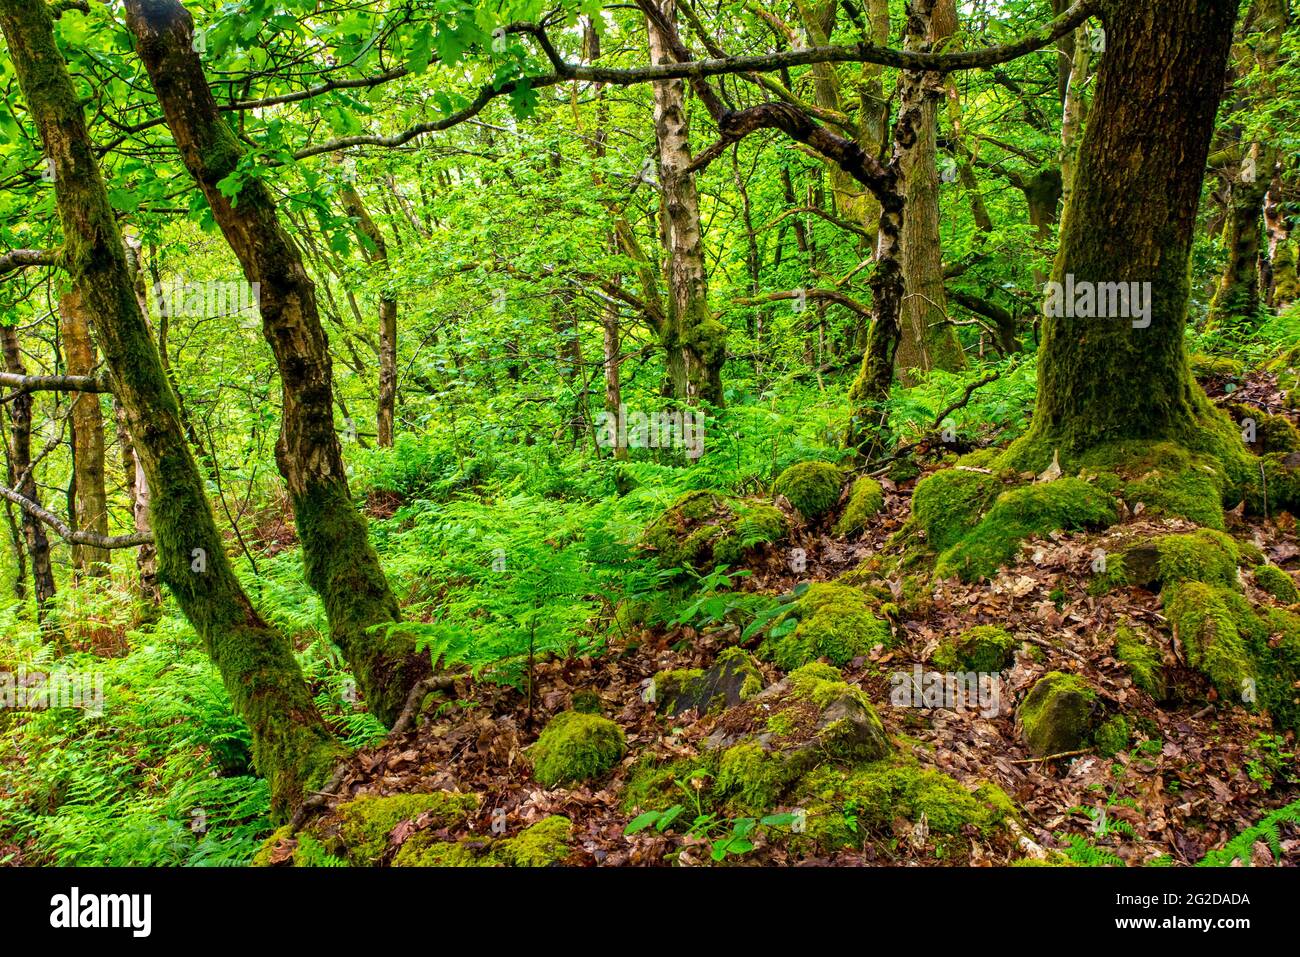 Trees in early summer at Shining Cliff Woods on the west bank of the River Derwent near Ambergate in the Derbyshire Peak District England UK Stock Photo